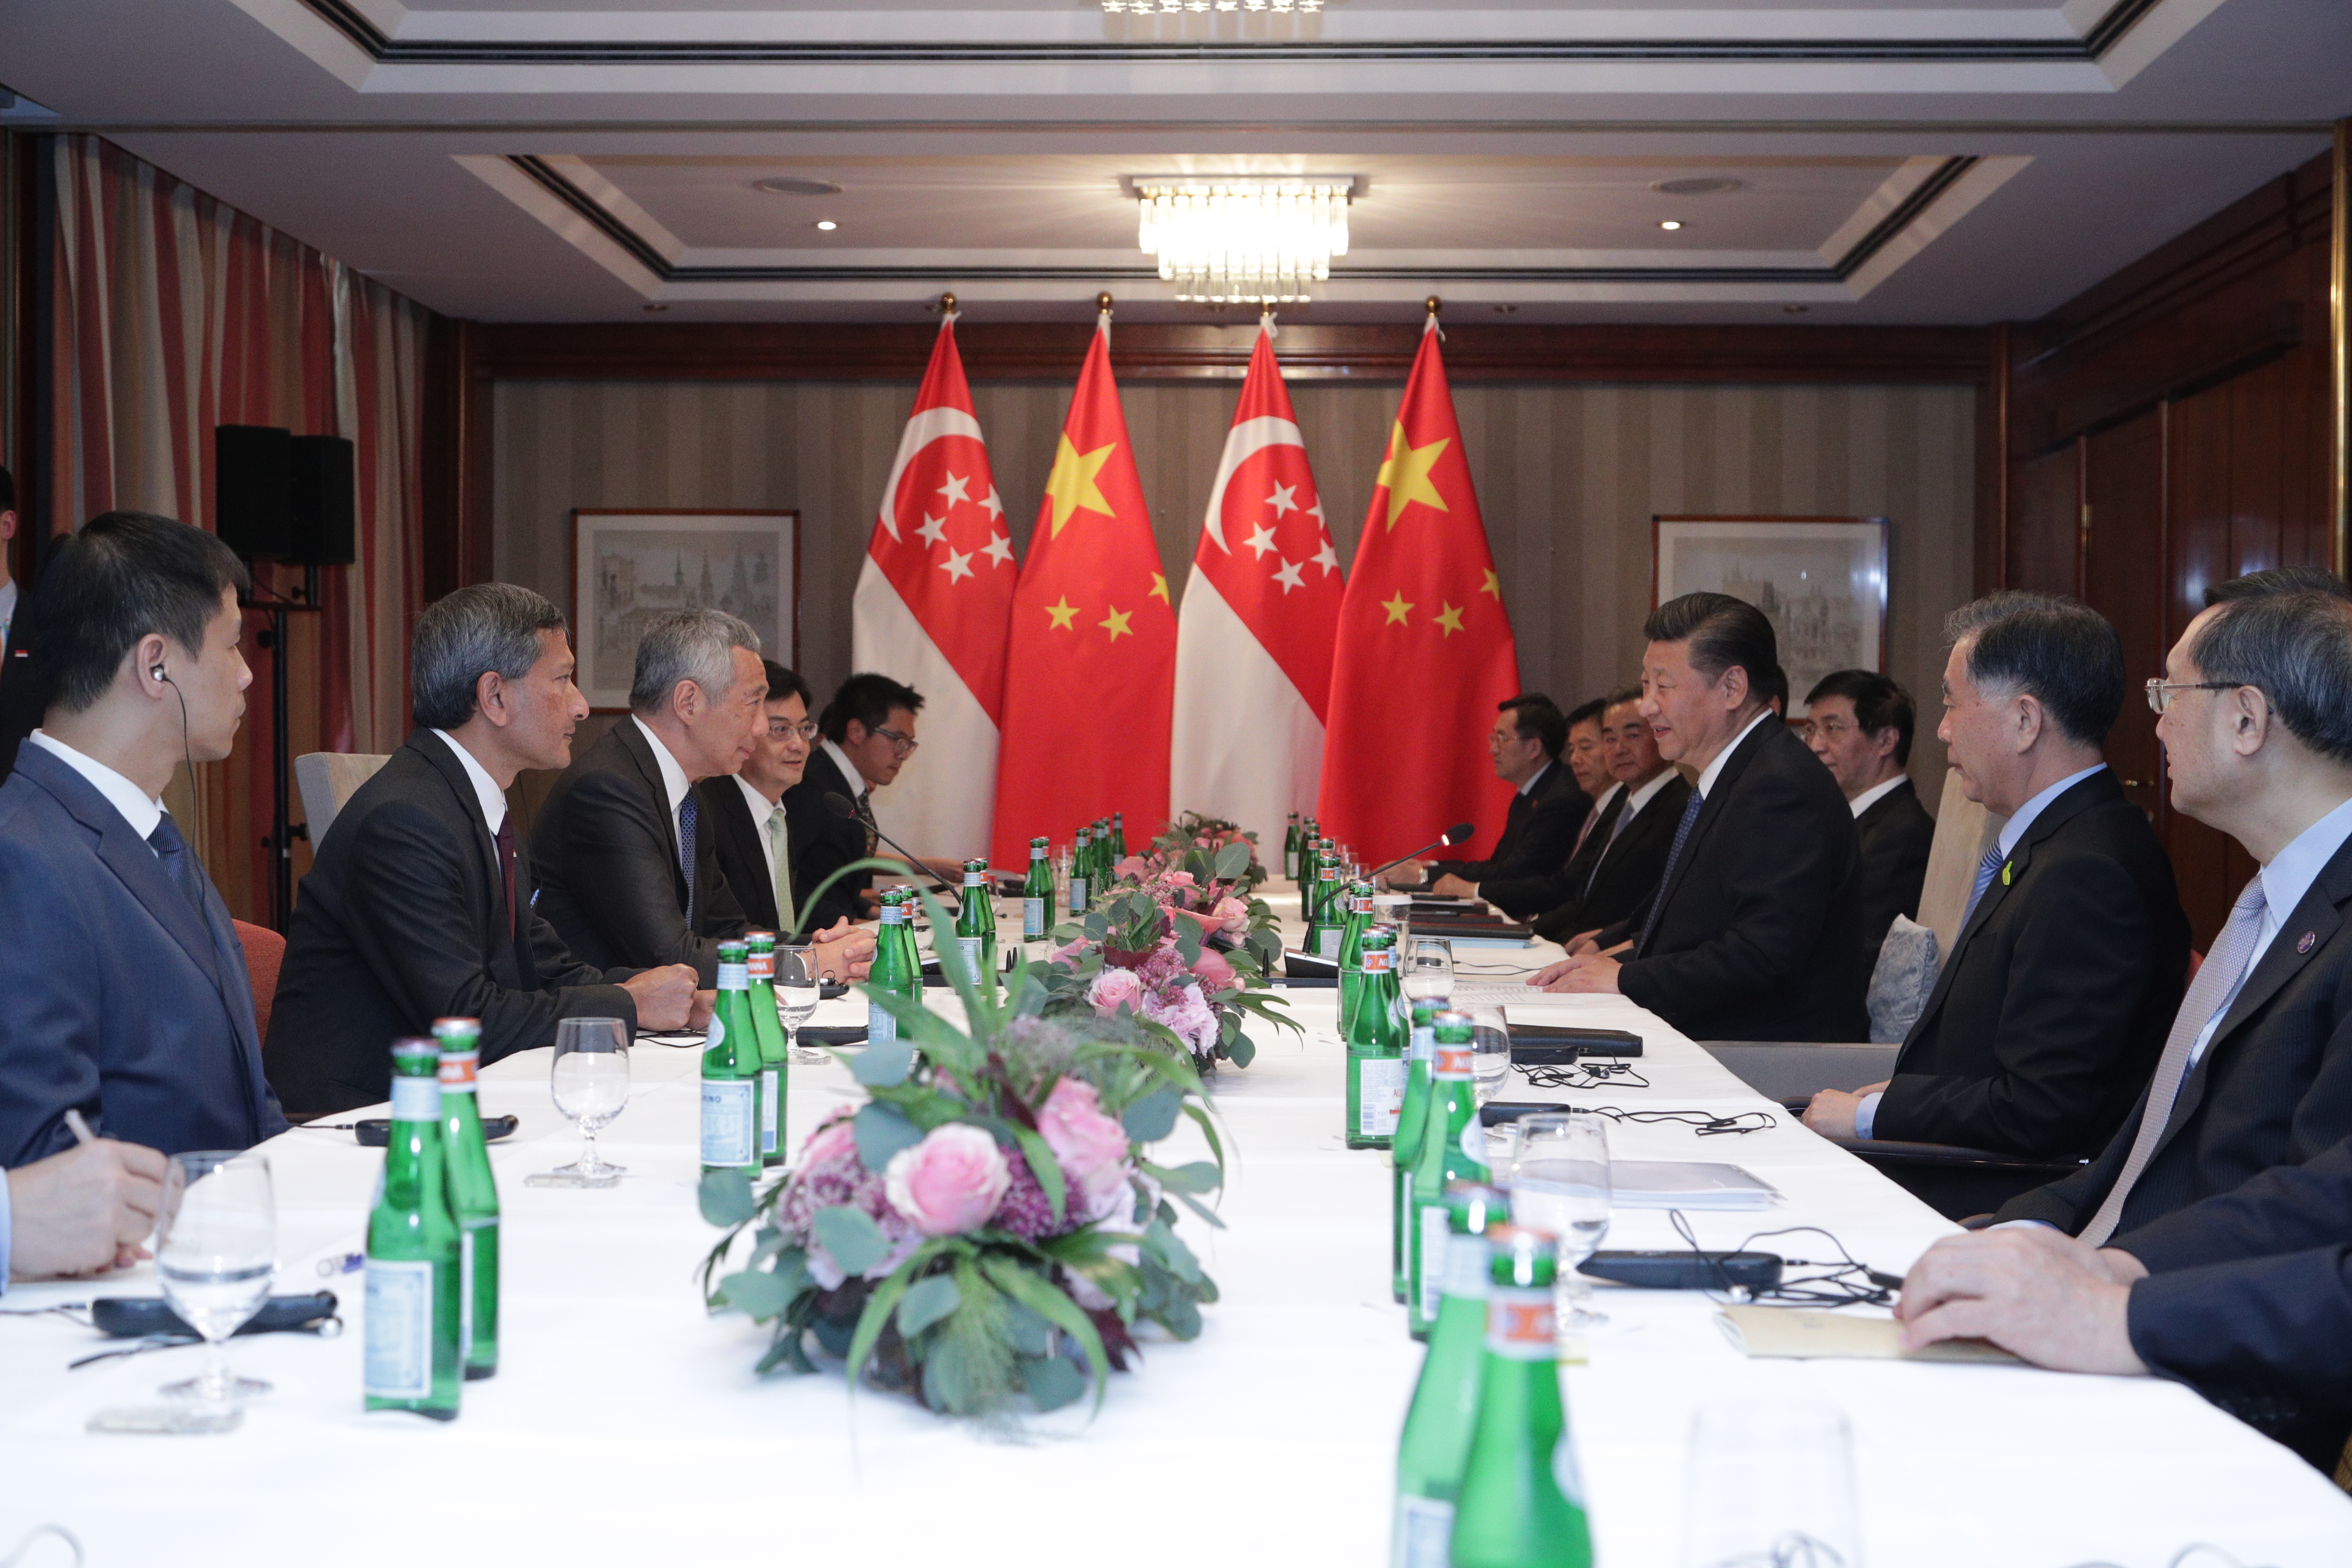 PM Lee at G20 summit in Hamburg on 7 to 8 July 2-17 (MCI Photo by Kenji Soon)